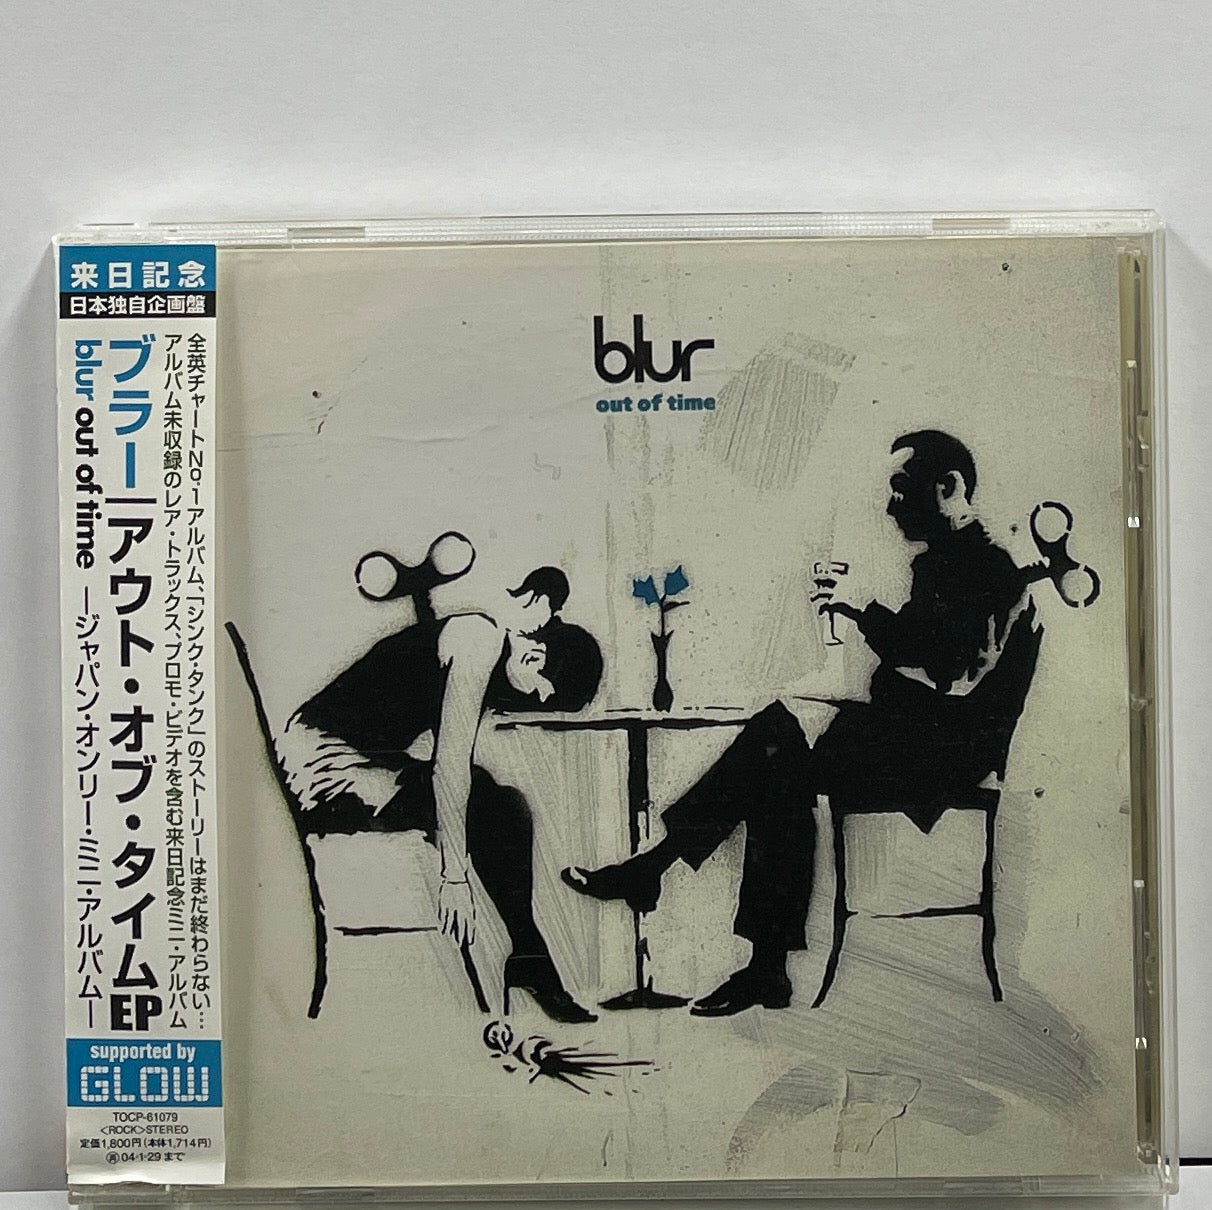 Blur – Out Of Time 7' UK盤 - 洋楽